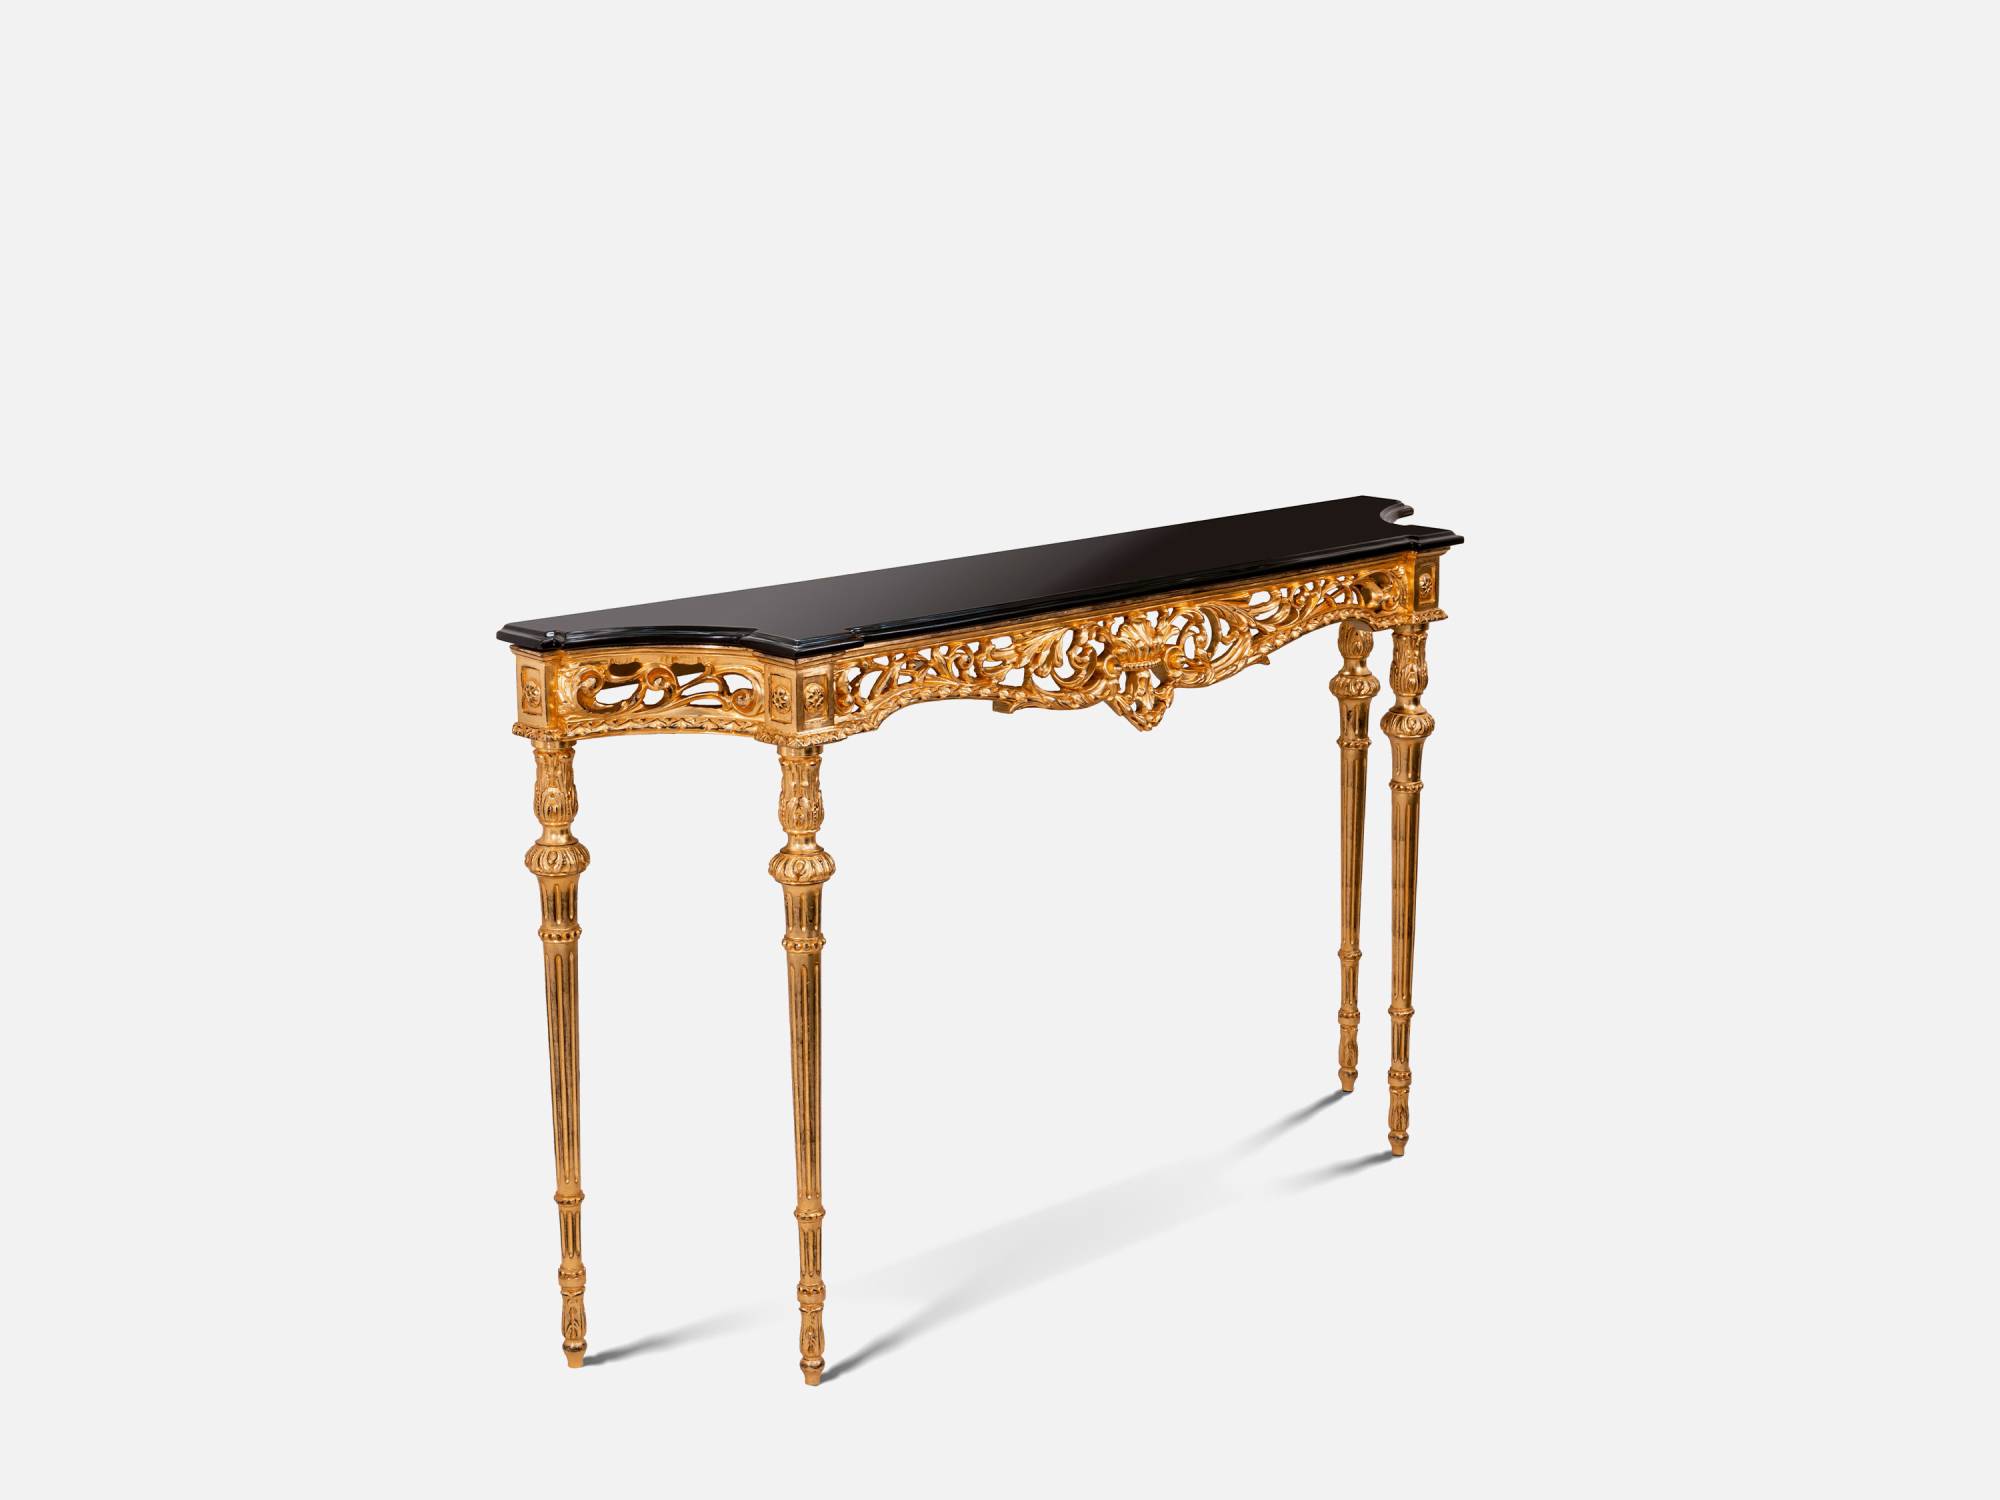 ART. 2317 - C.G. Capelletti quality furniture with made in Italy contemporary Console